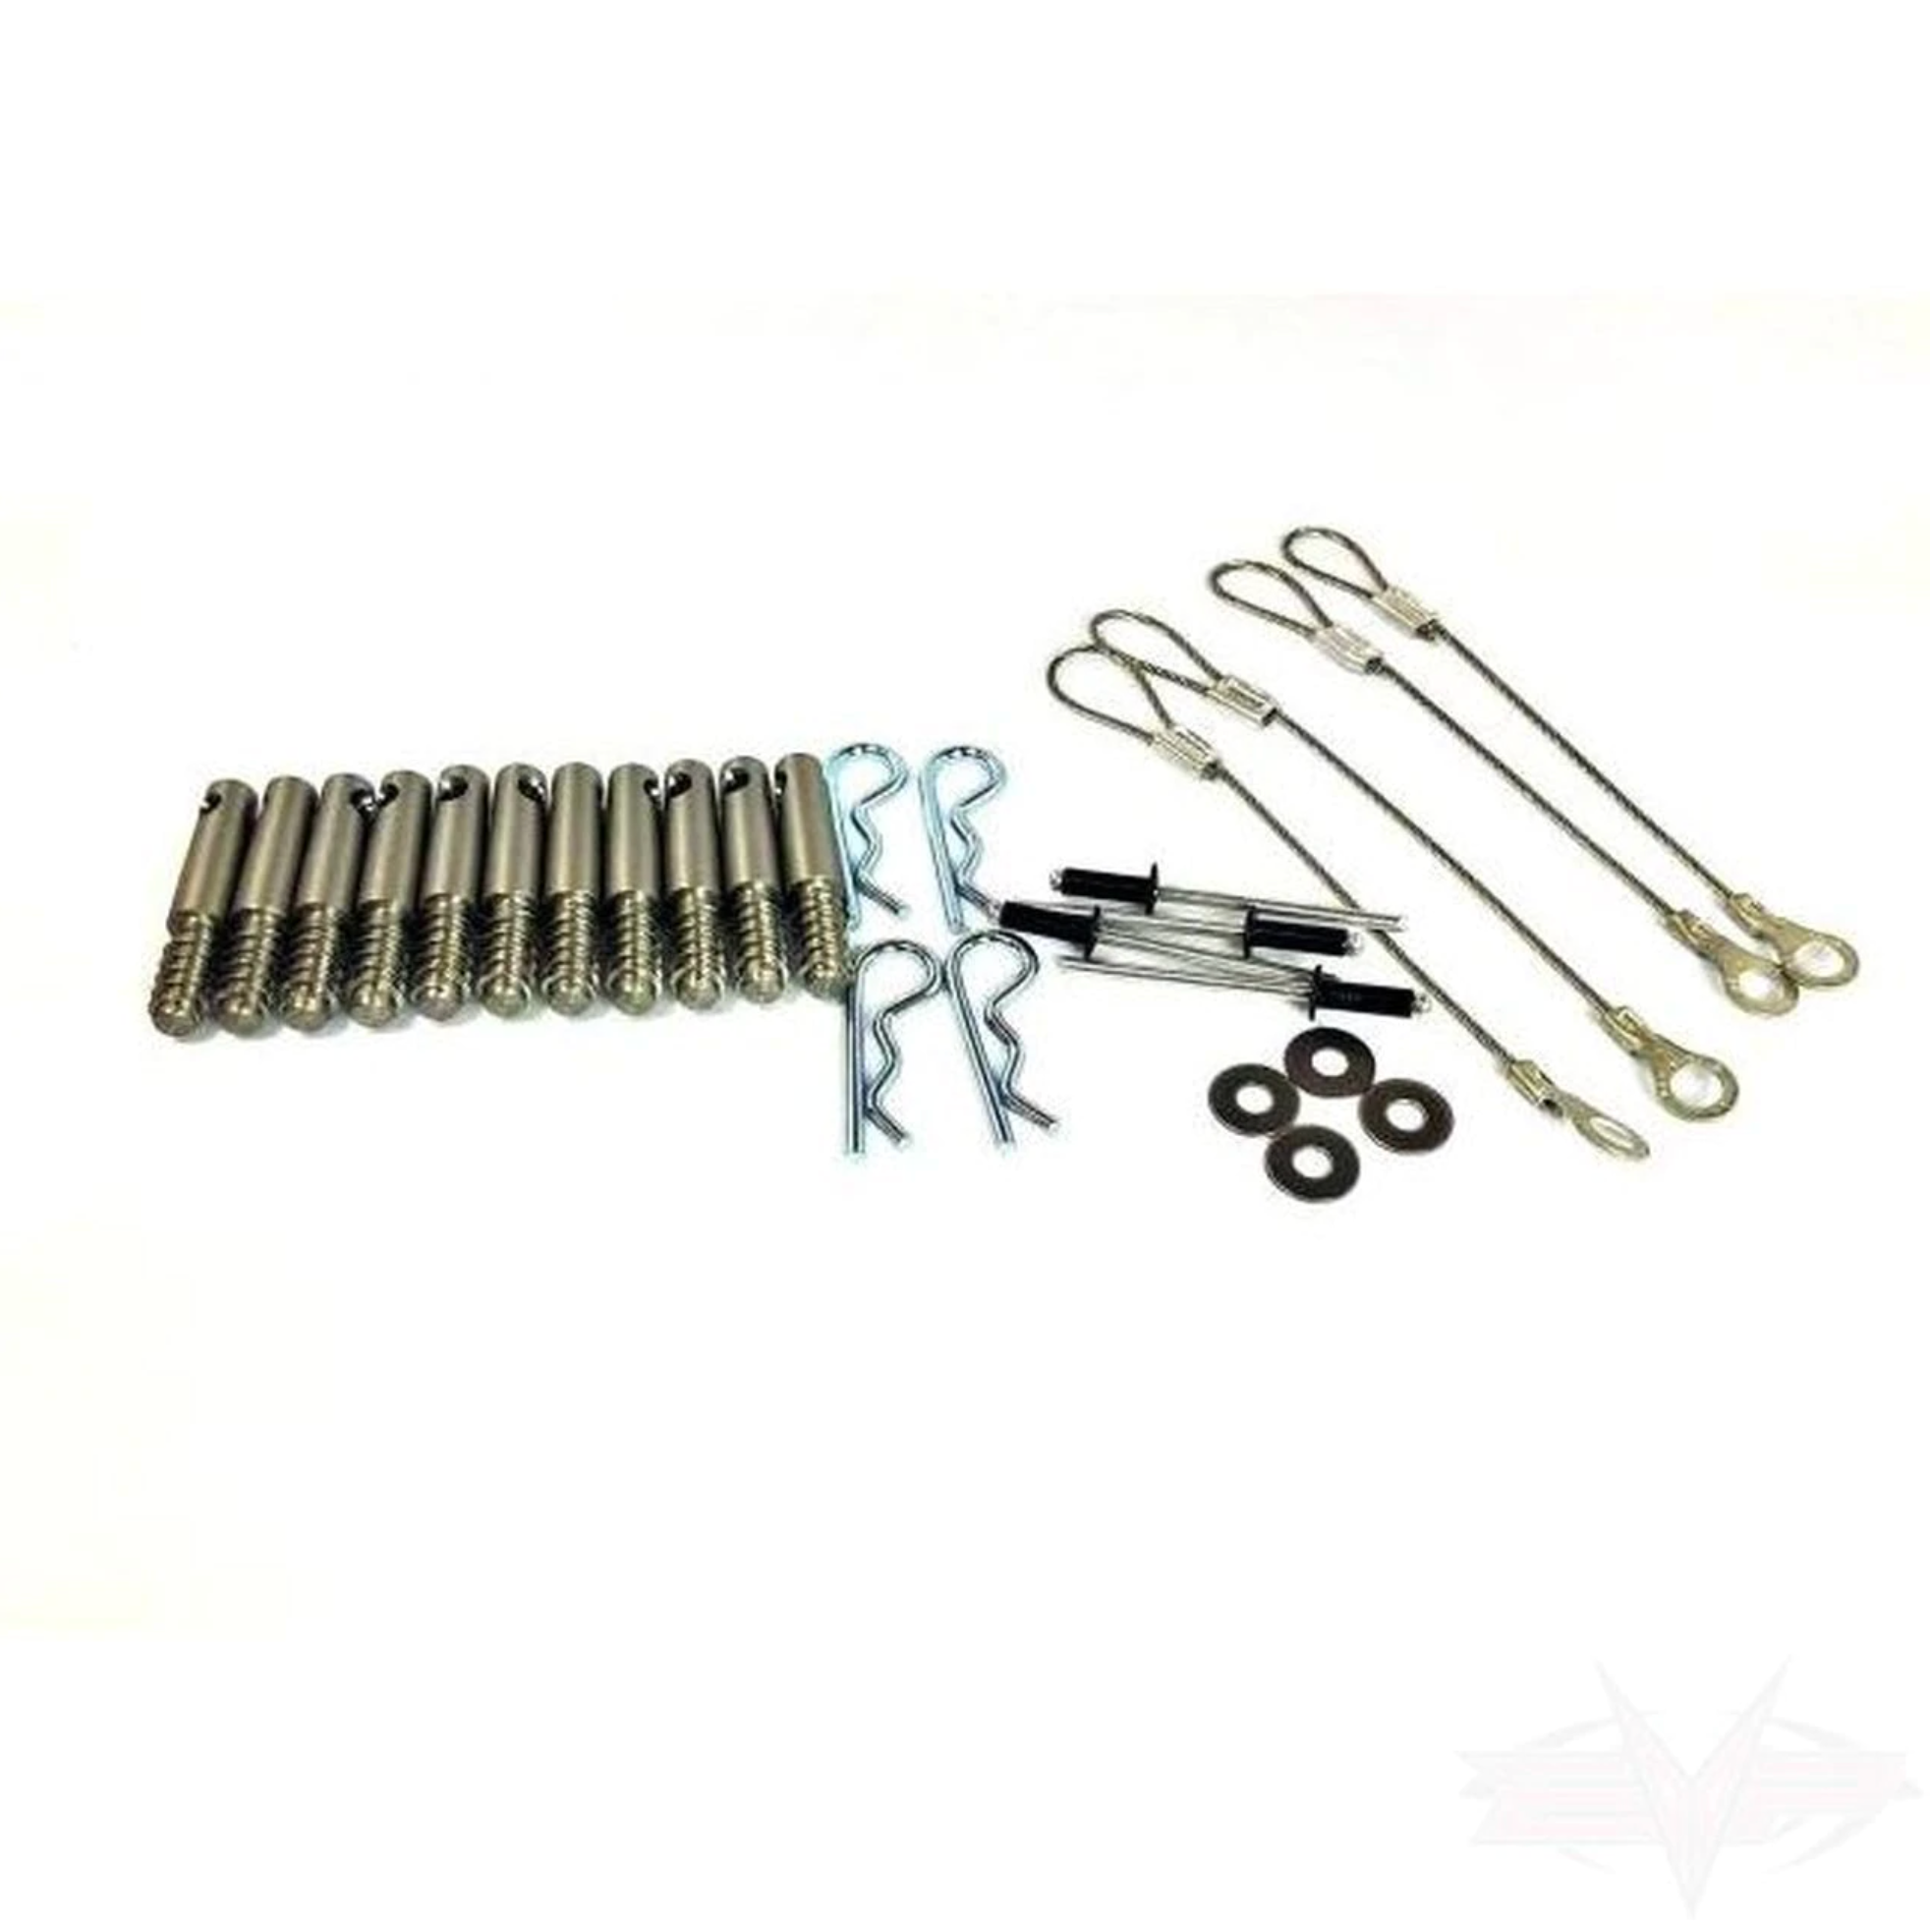 CAN AM X3 CLUTCH QUICK RELEASE KIT